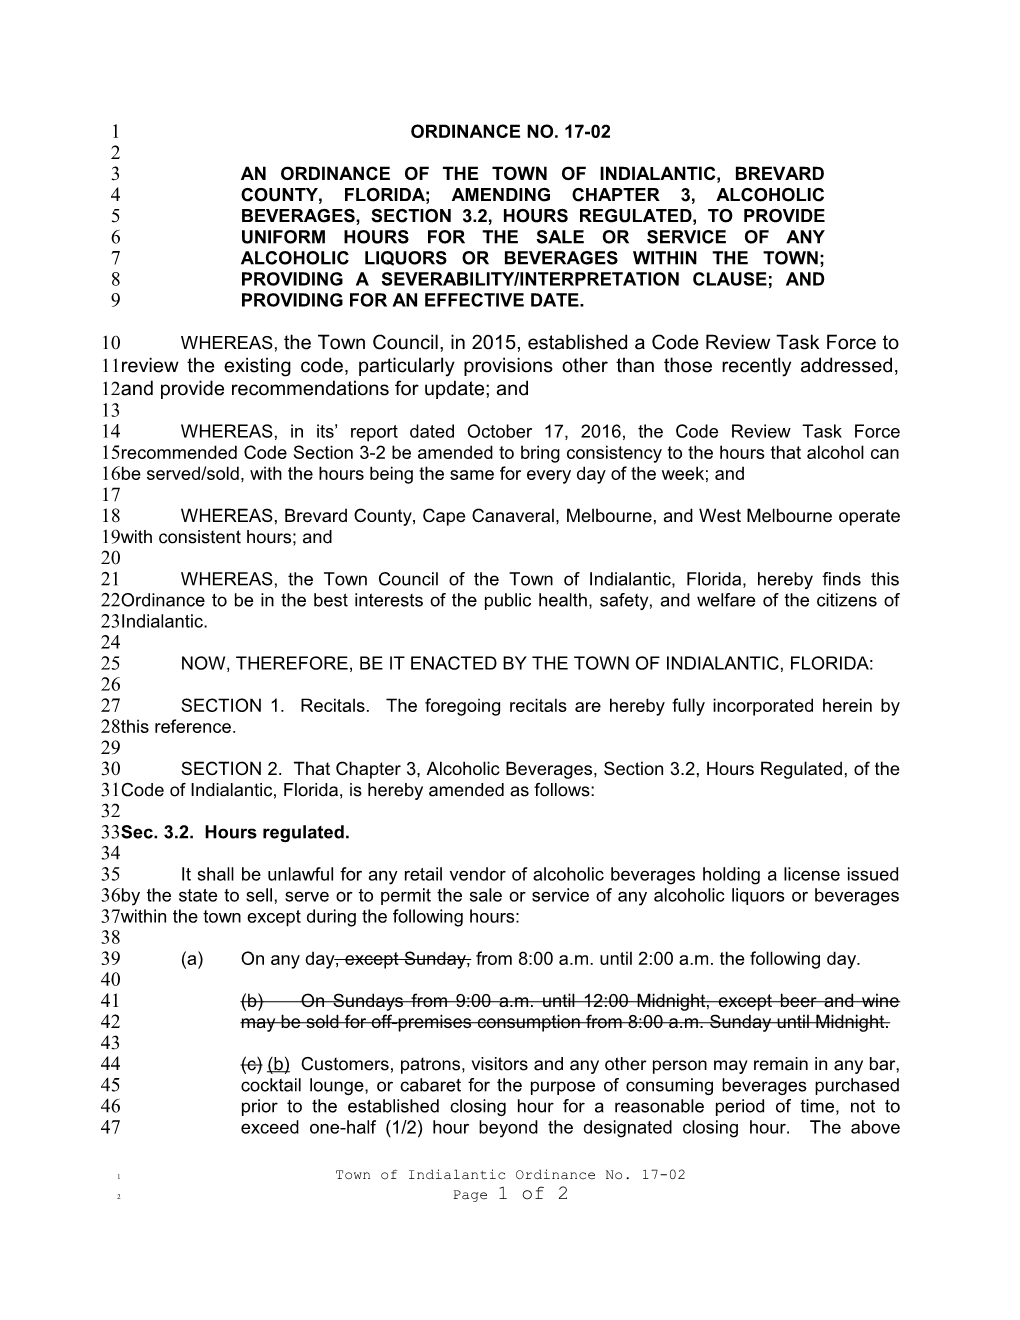 An Ordinance of the Town of Indialantic, Brevard County, Florida; Amending Chapter 3